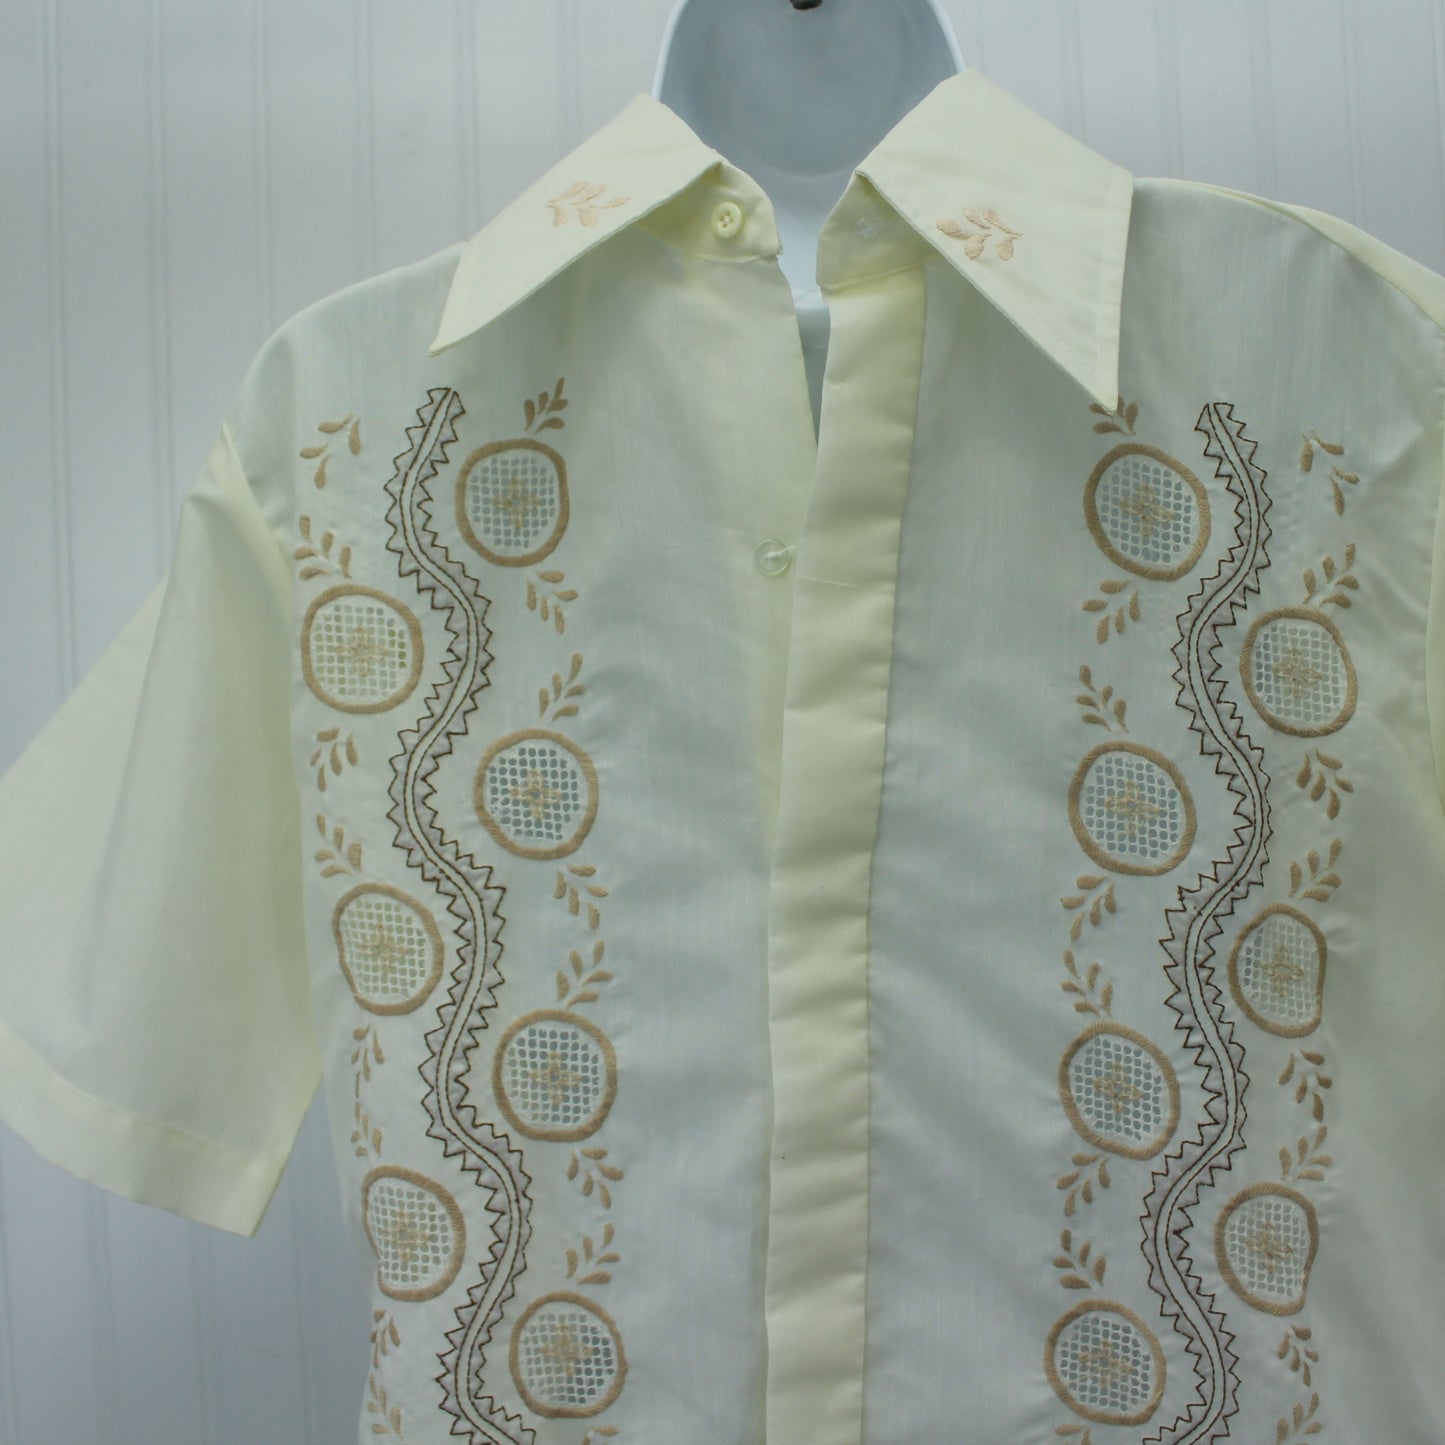 Older Filipino Baron Shirt Heavily Embroidered Pocket Front Placket Back All Gender closeup of front embroidery and collar